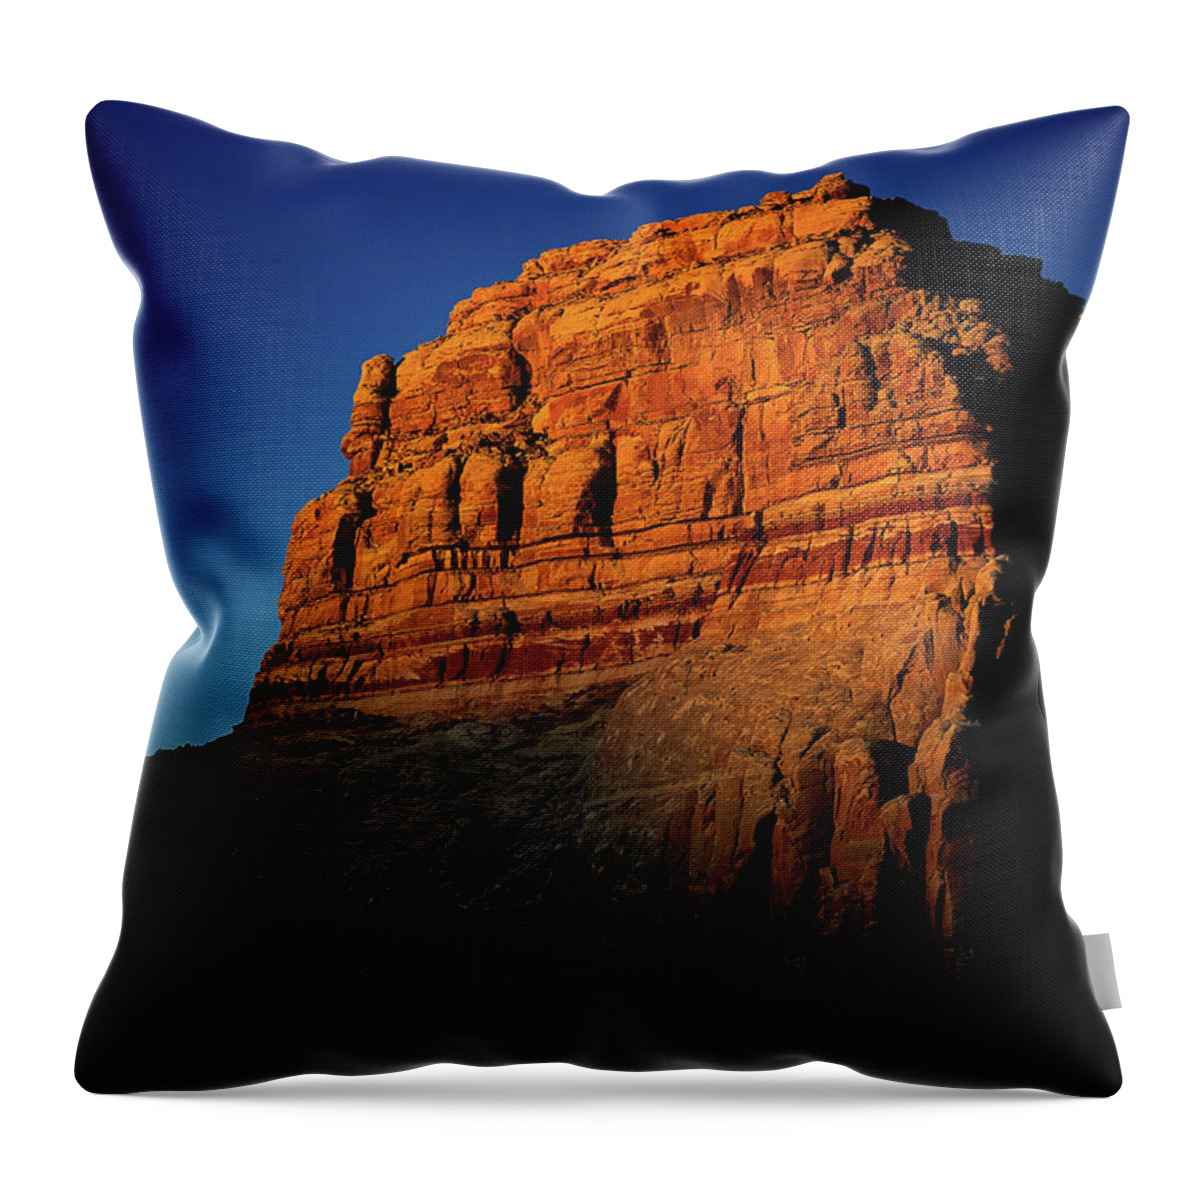 Art Throw Pillow featuring the photograph Good Night Red Cliff by Edgars Erglis